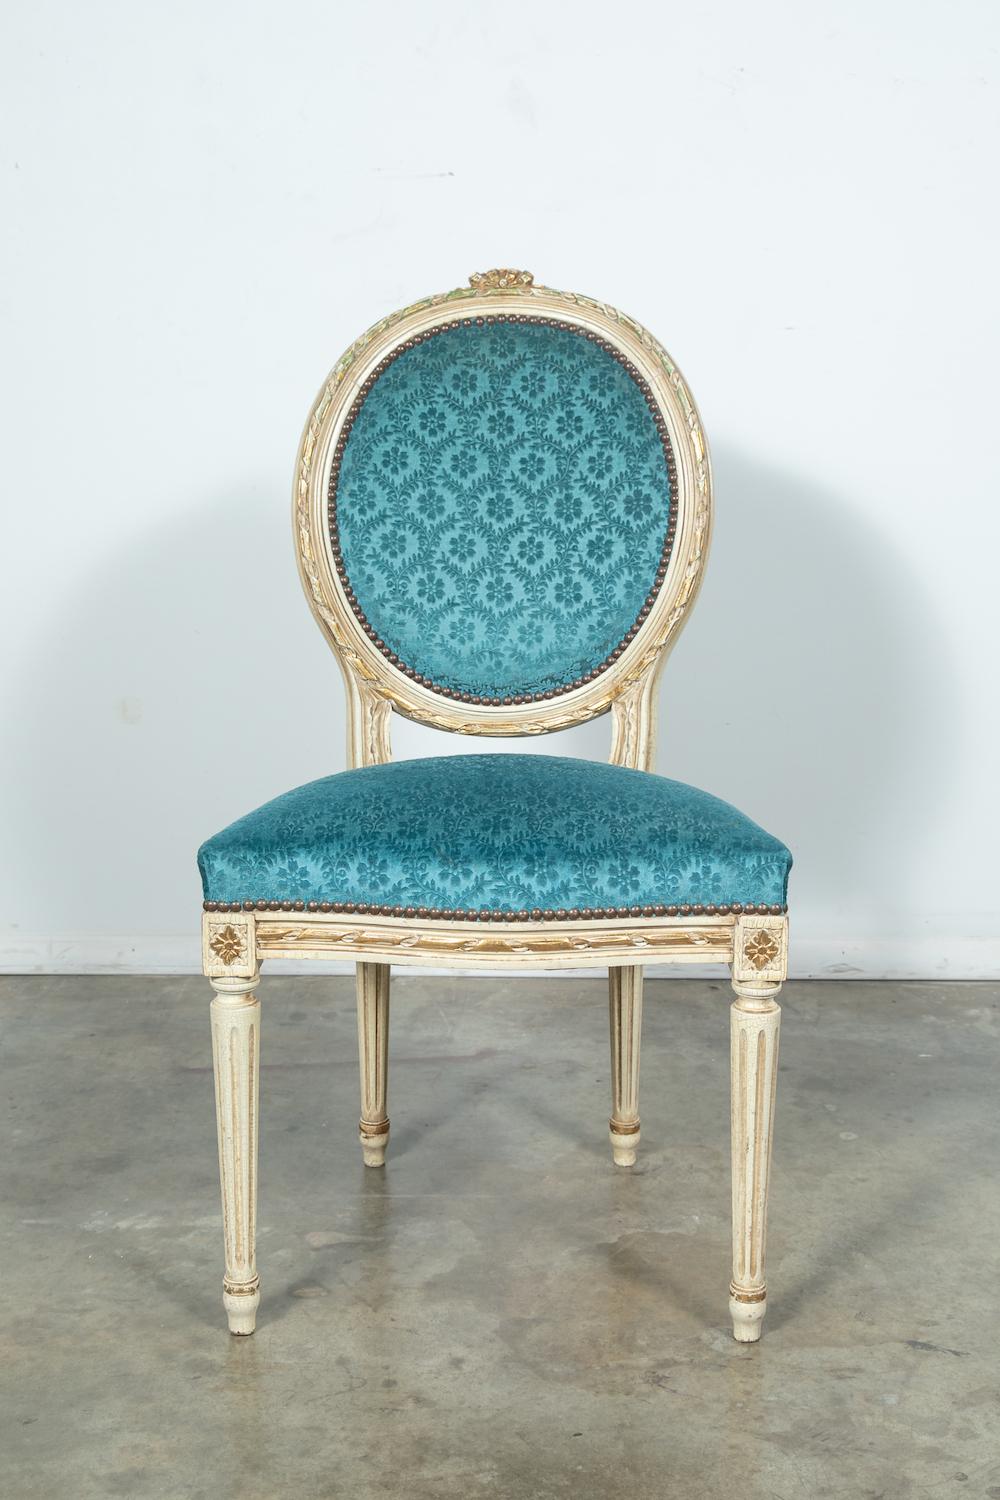 A wonderful set of six French Louis XVI style Maison Jansen attributed dining chairs in a fine parcel-gilt and paint decorated finish with touches of emerald green paint and a crackle finish having medallion shaped backrests with an intricately